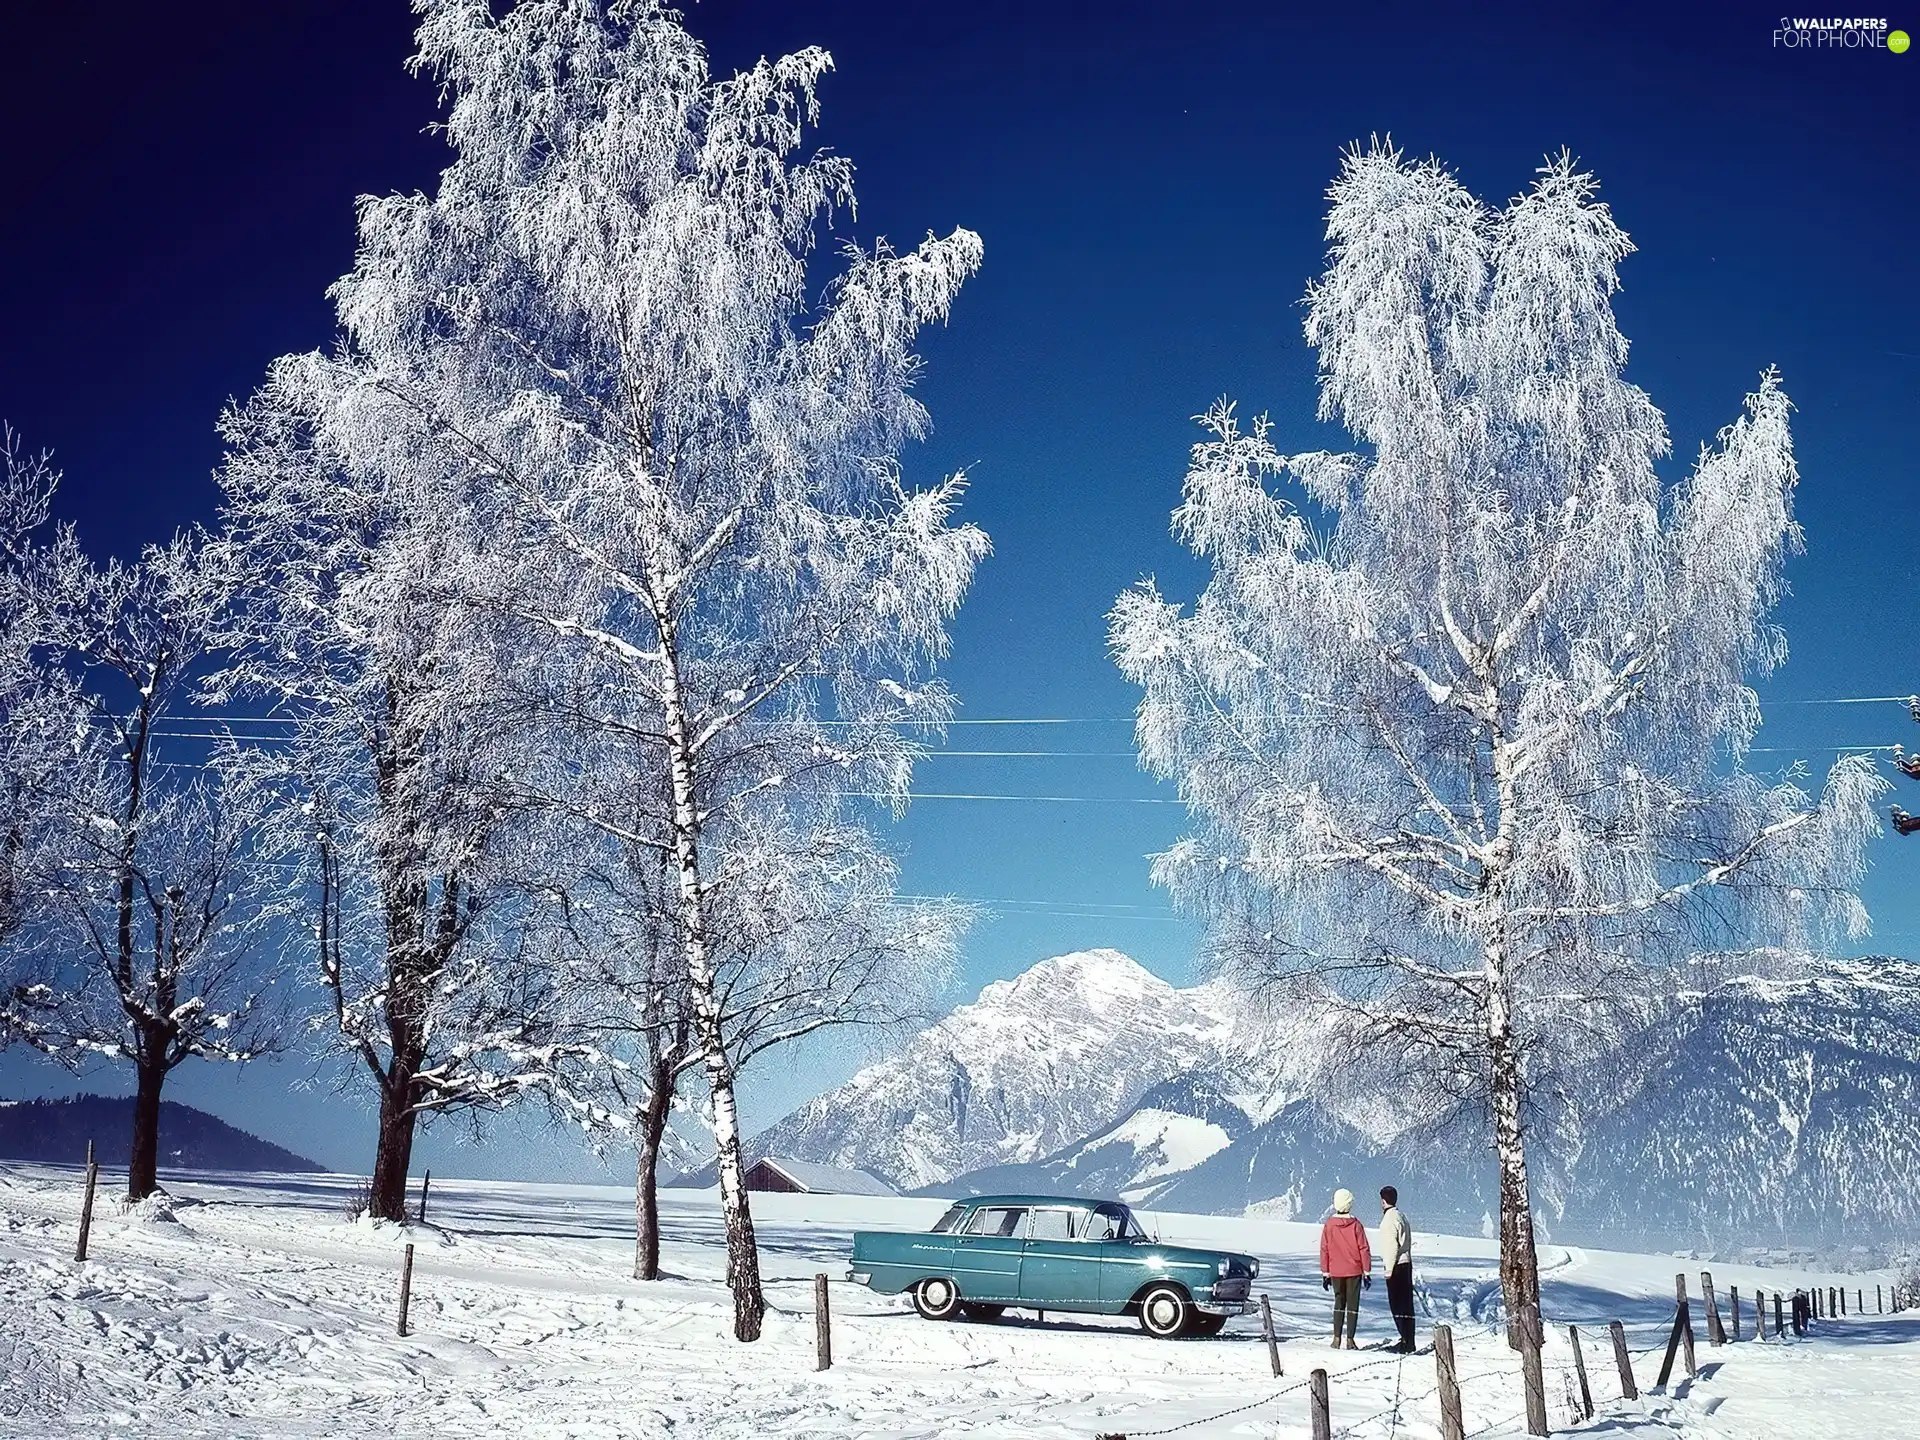 trees, mountains, Automobile, People, viewes, Snowy